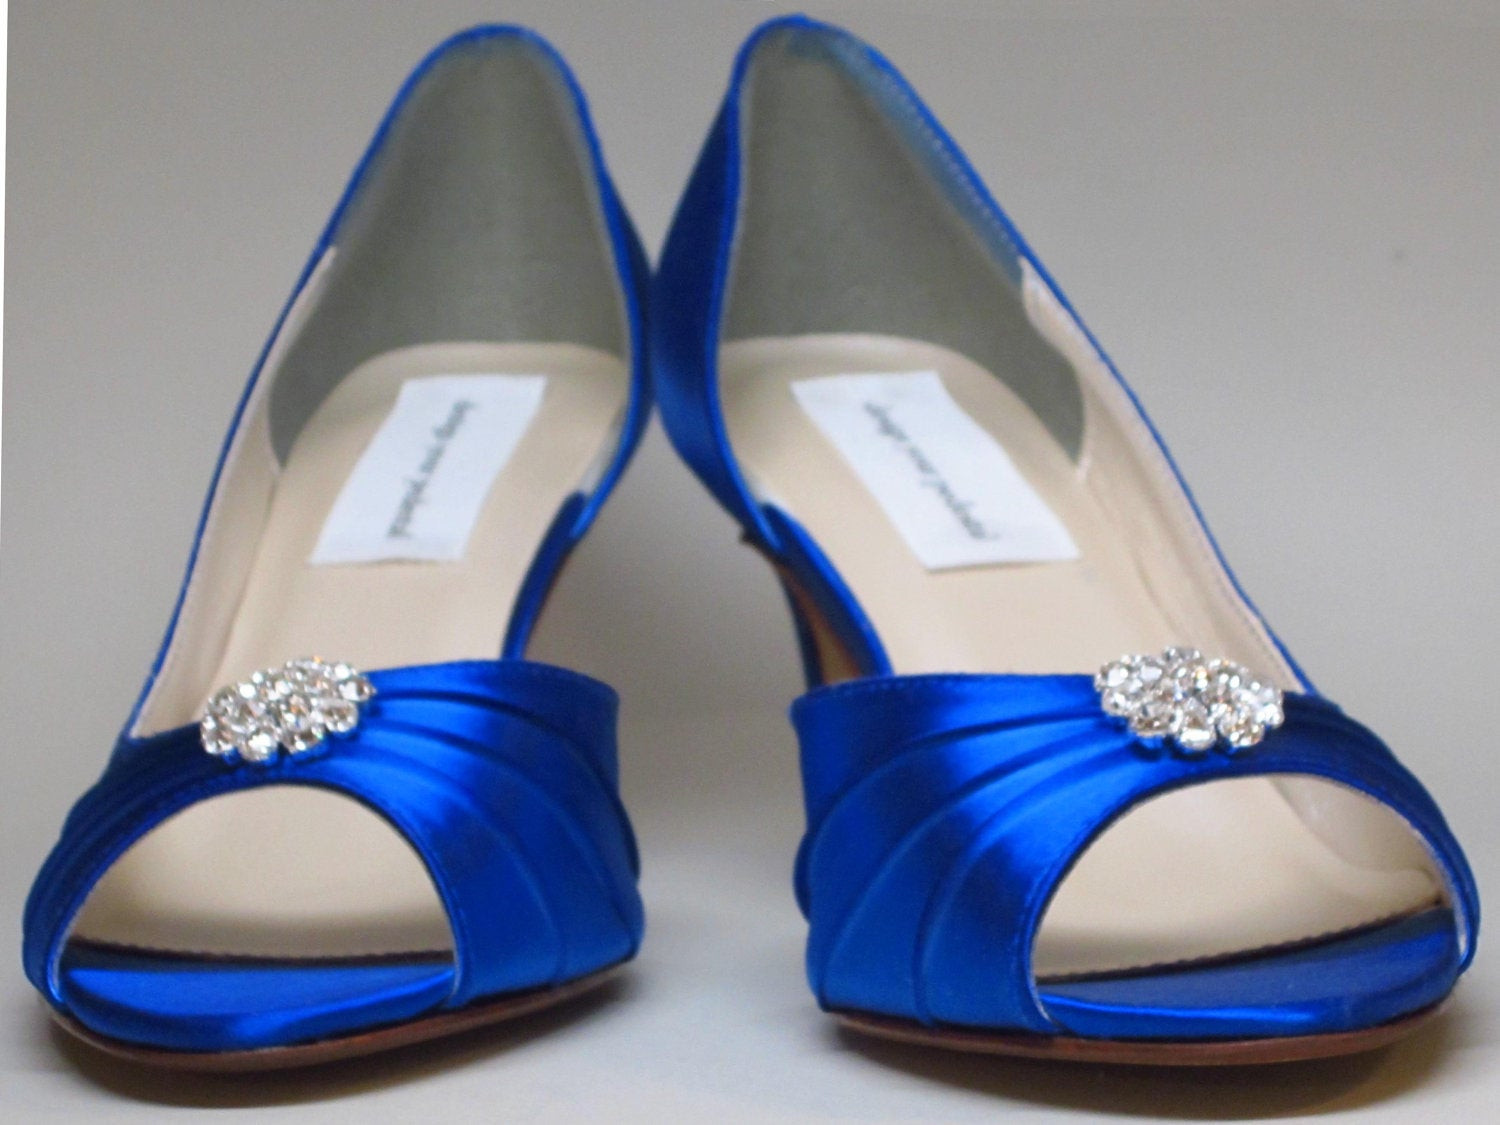 Blue Wedding Shoes For Bride
 Unavailable Listing on Etsy